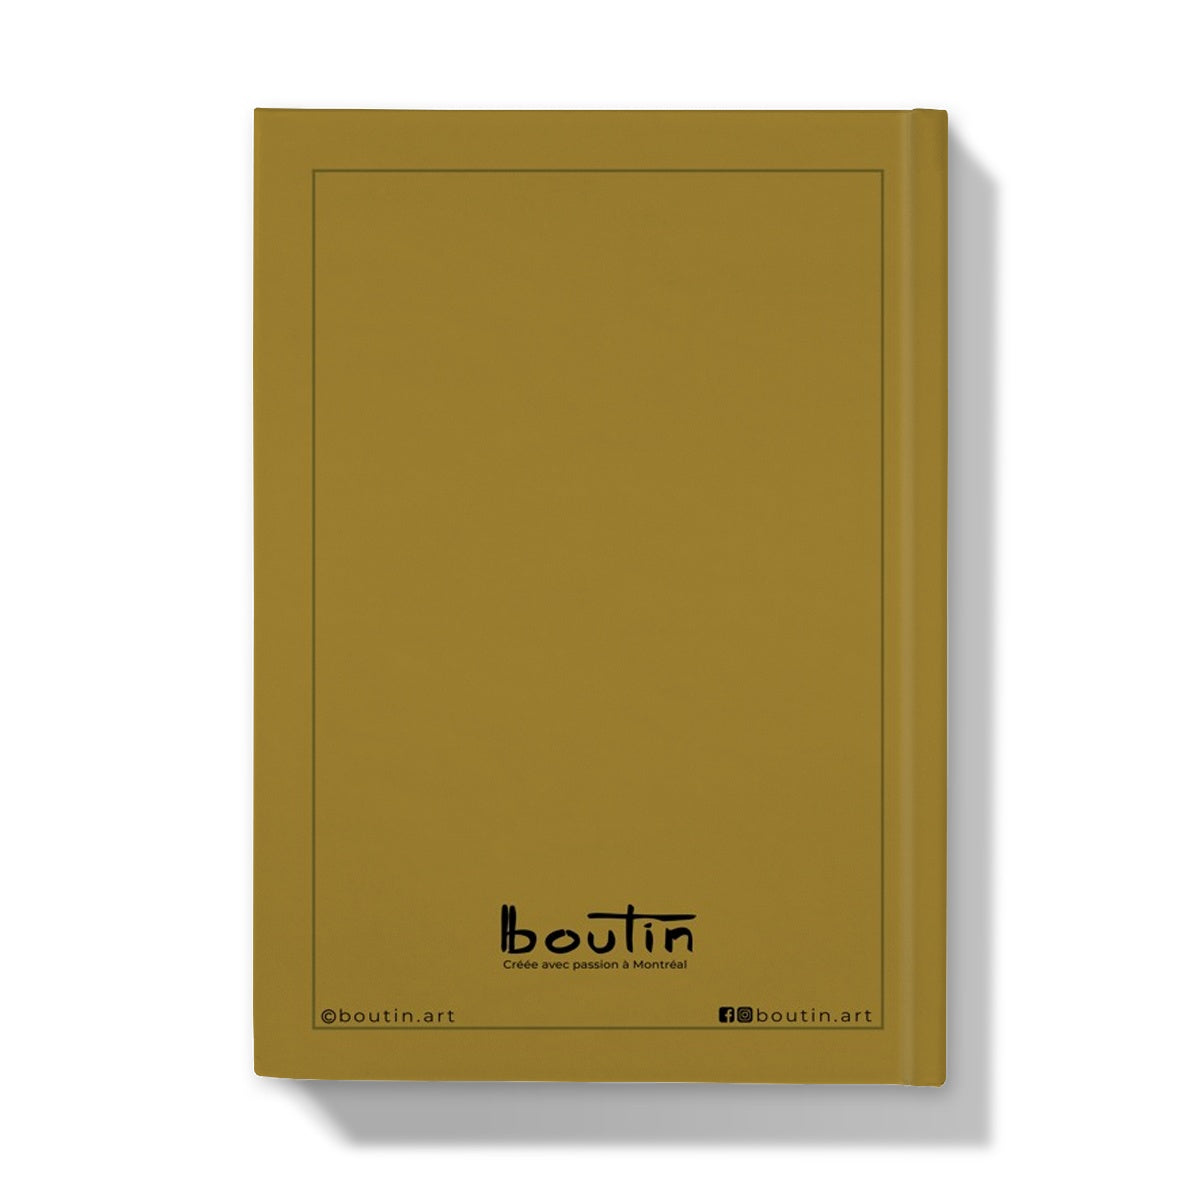 Arlette - Notebook by the artist Boutin